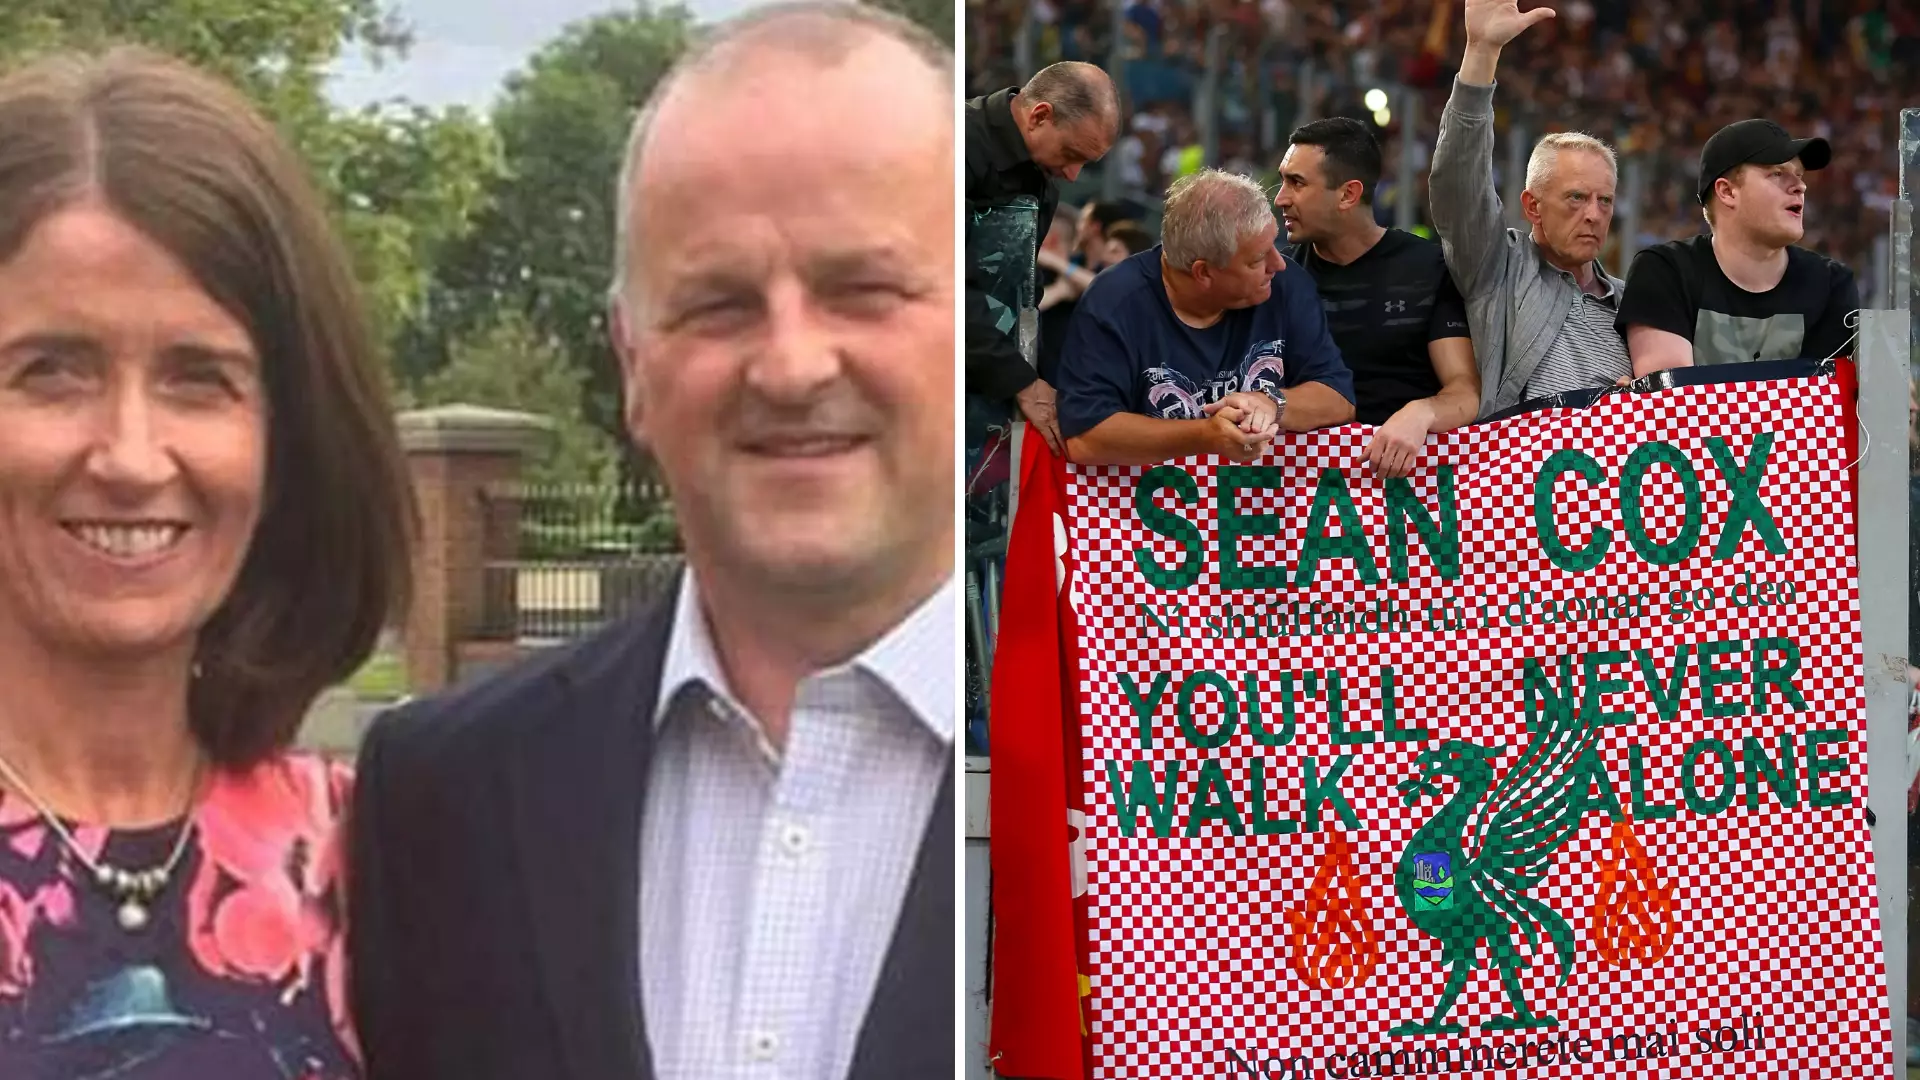 Roma To Donate €150,000 To The Family Of Liverpool Fan Sean Cox